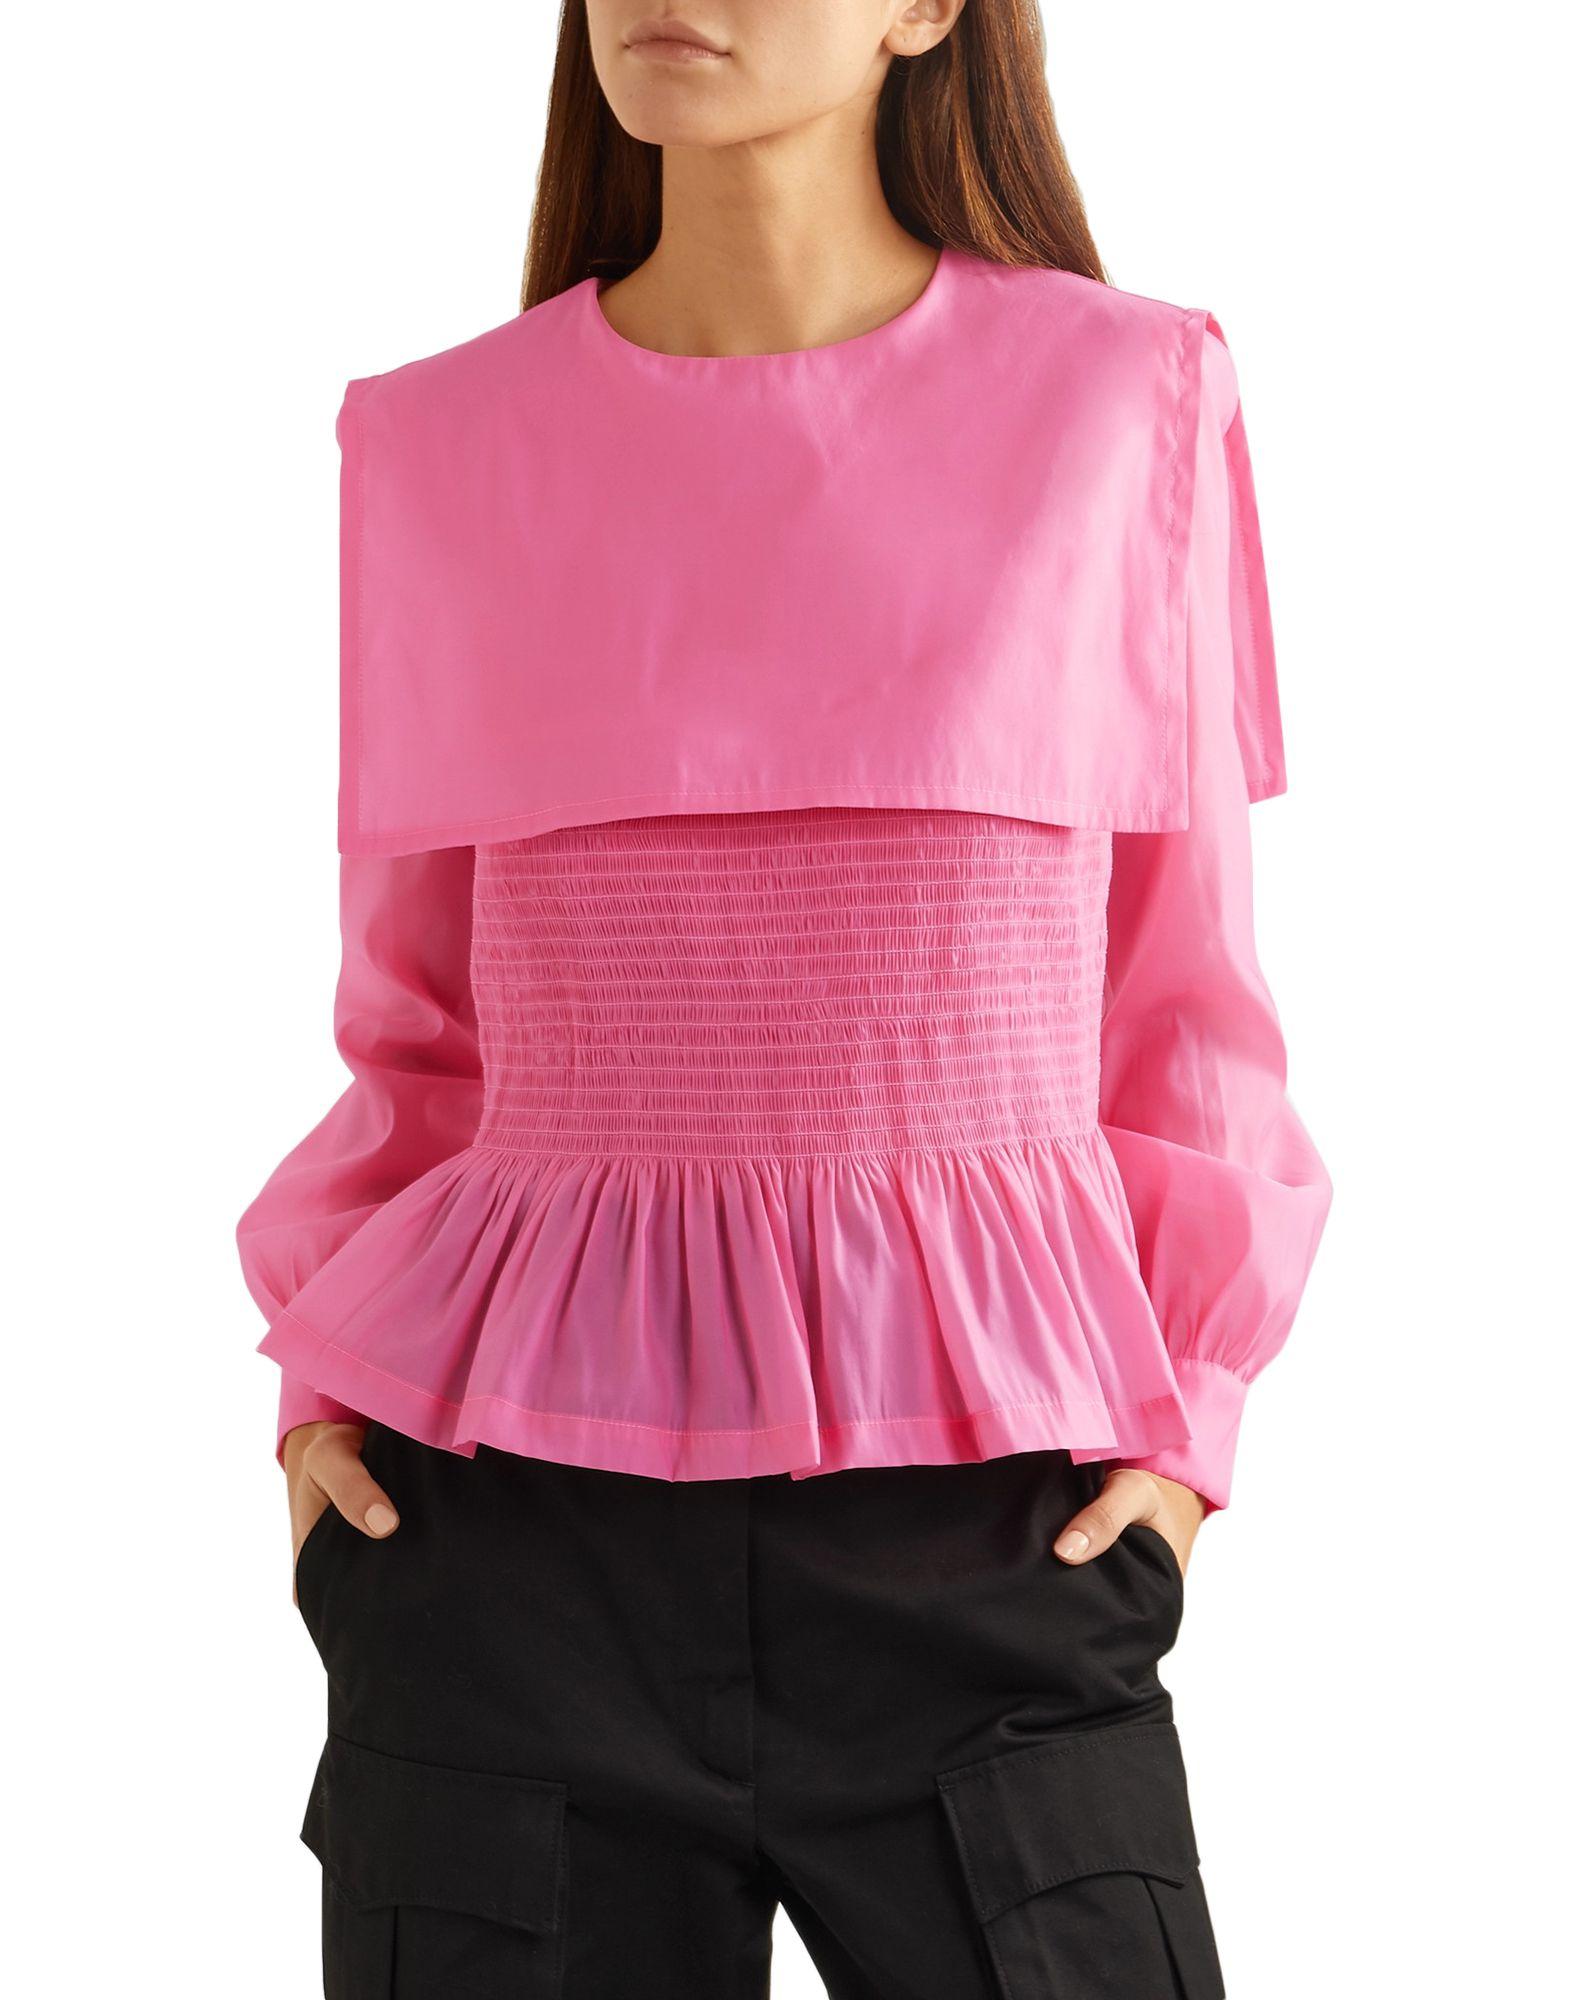 Molly Goddard Synthetic Blouse in Pink - Lyst